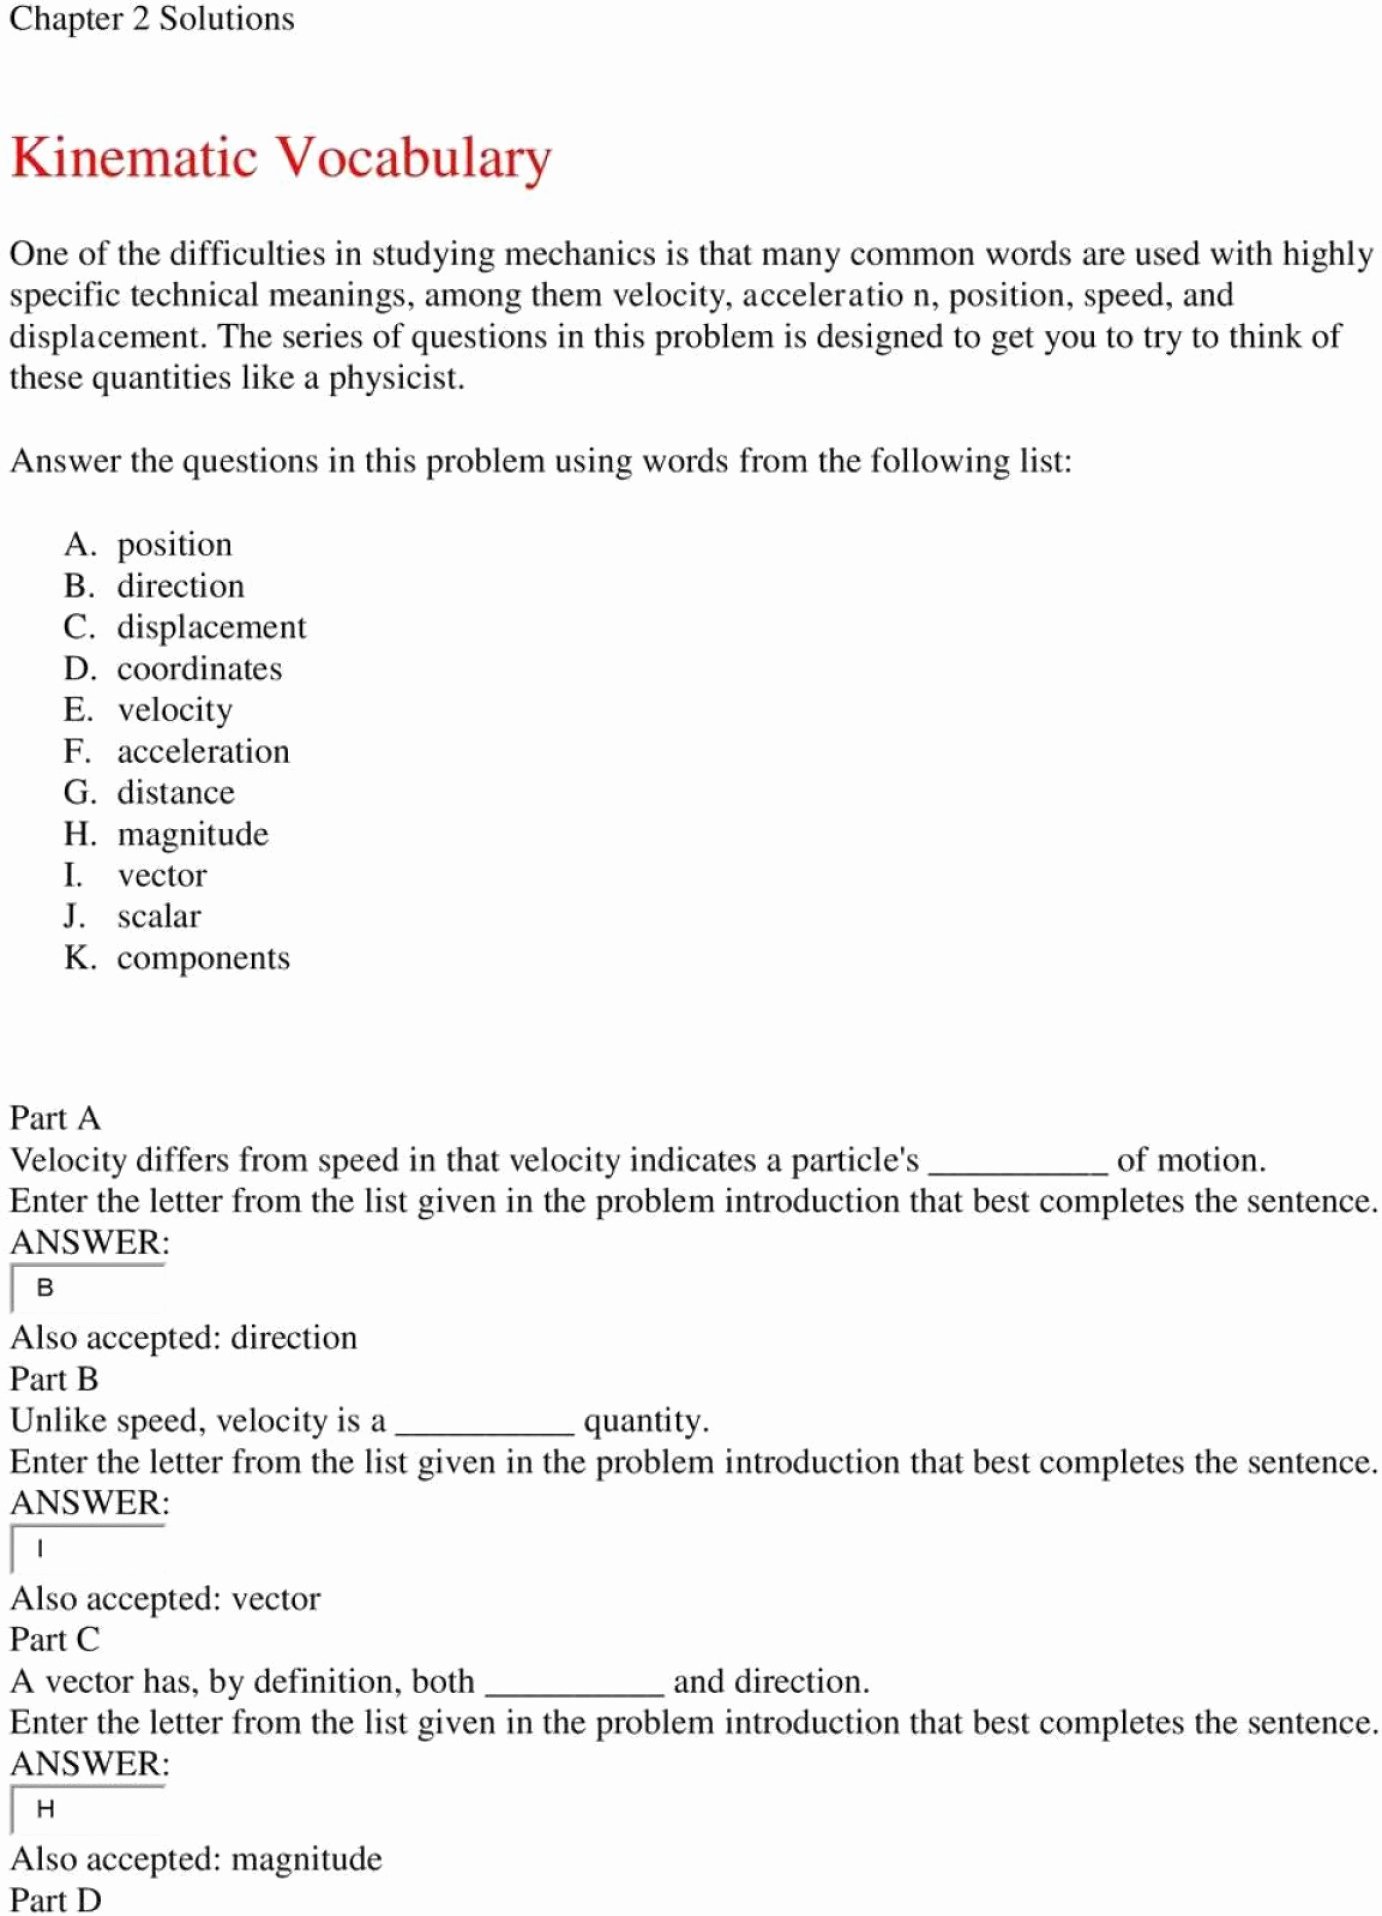 Projectile Motion Worksheet with Answers Awesome Projectile Motion Worksheet Answers the Physics Classroom